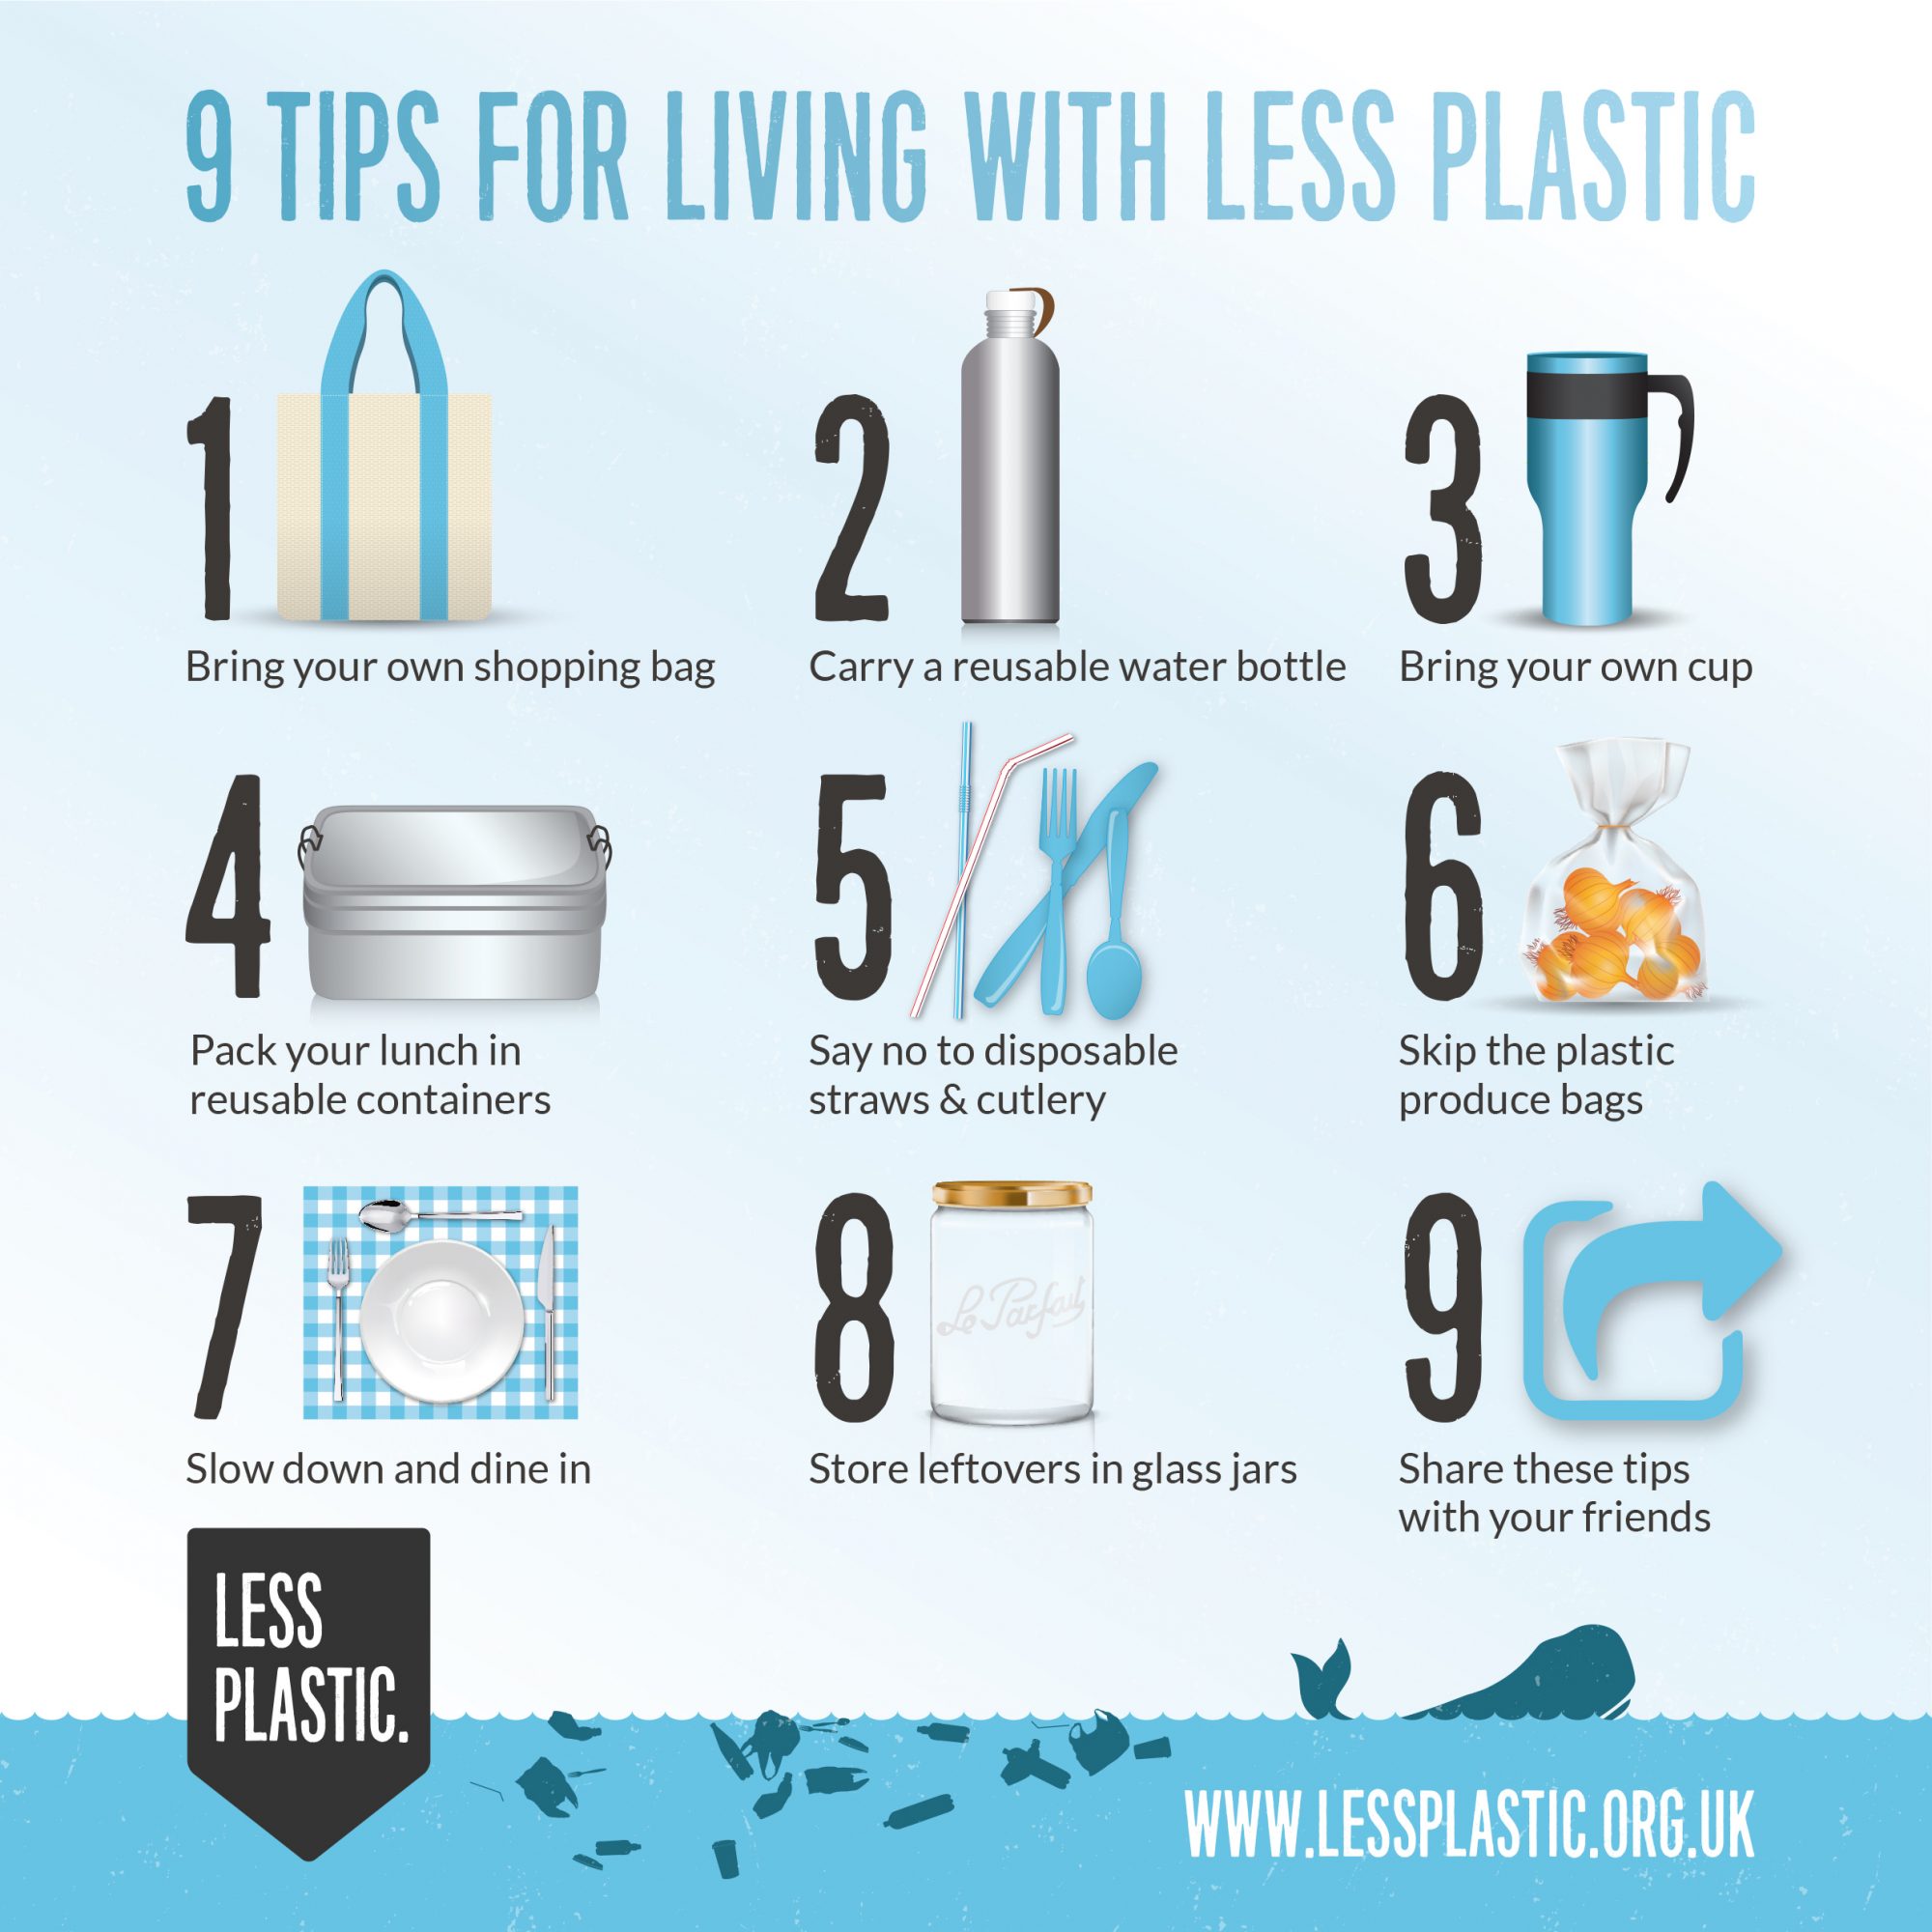 Cleaning plastic can be simple if you use these tips